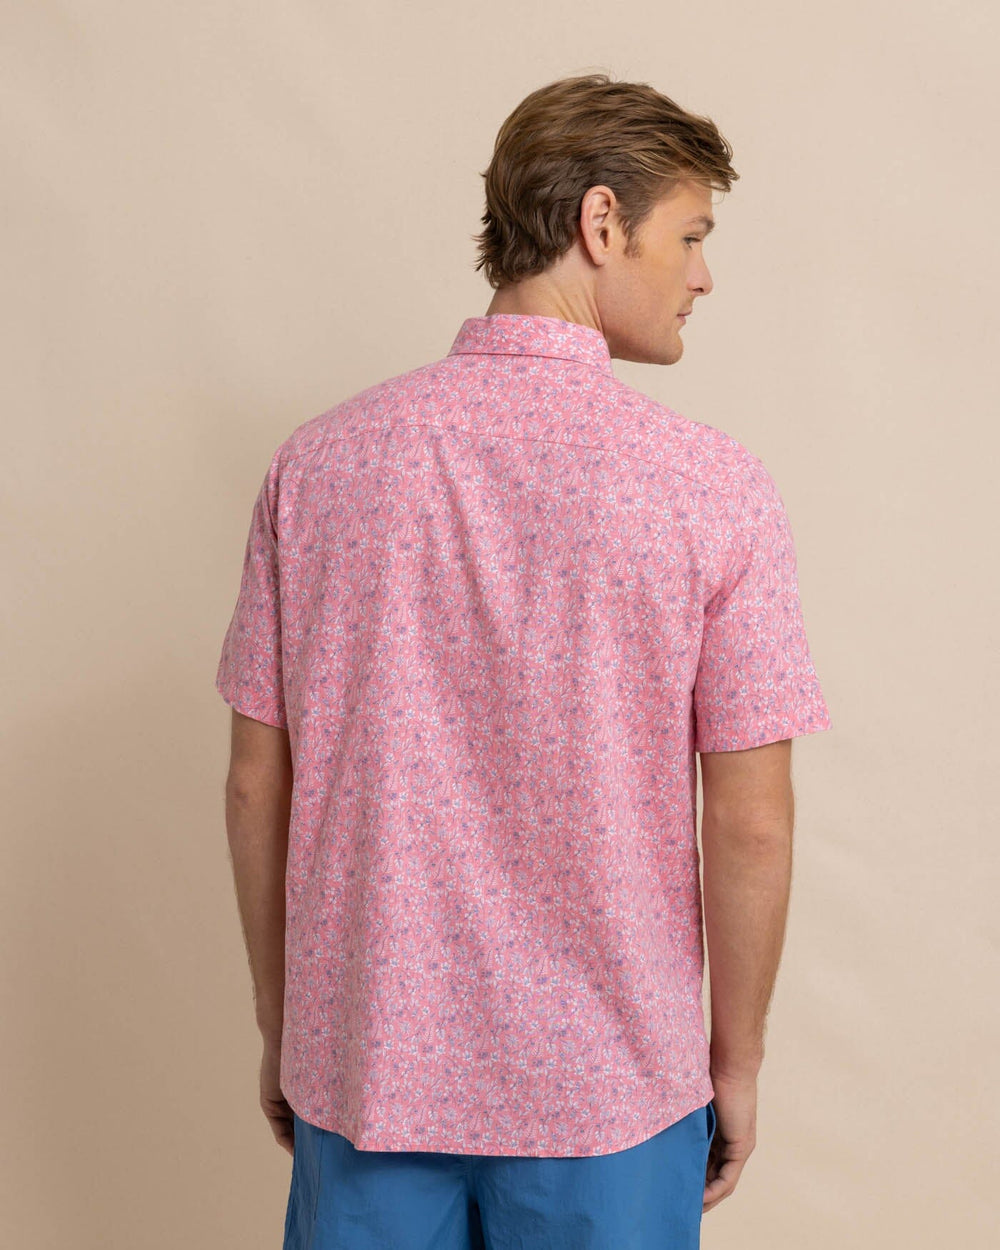 The back view of the Southern Tide Linen Rayon Ditzy Floral Short Sleeve Sport Shirt by Southern Tide - Geranium Pink